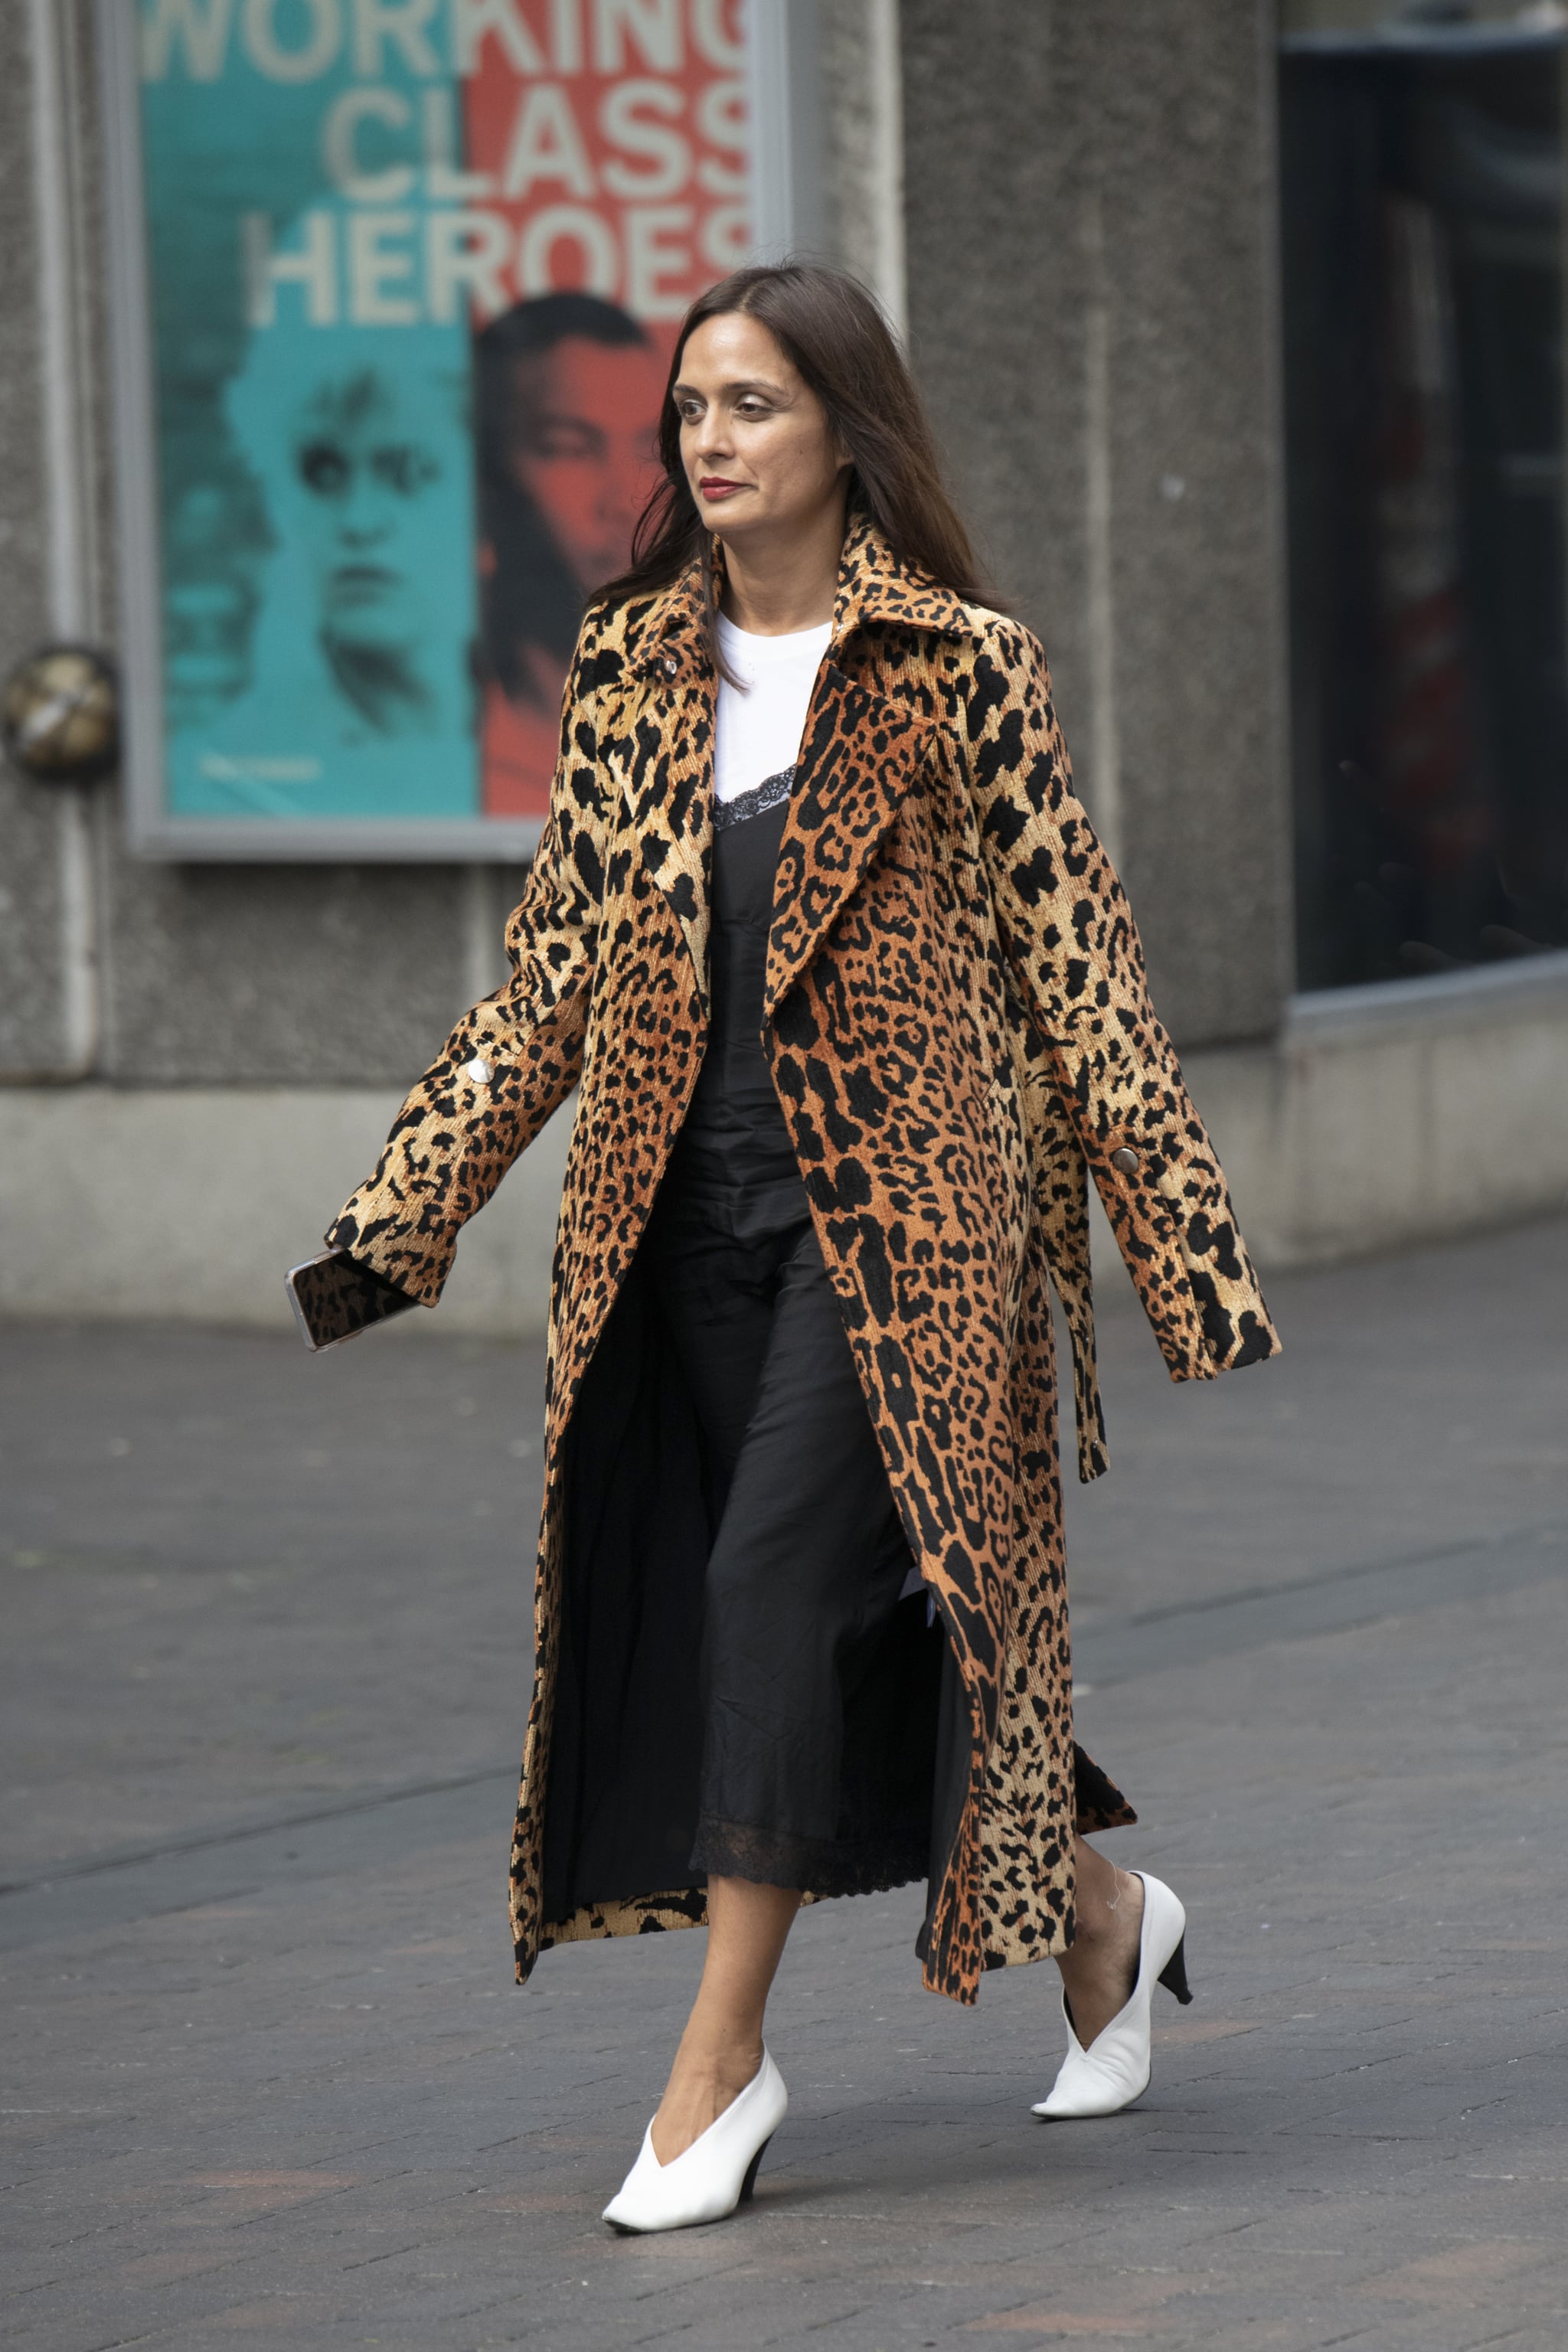 Temper a printed coat with a white t-shirt and finish with modern pumps.